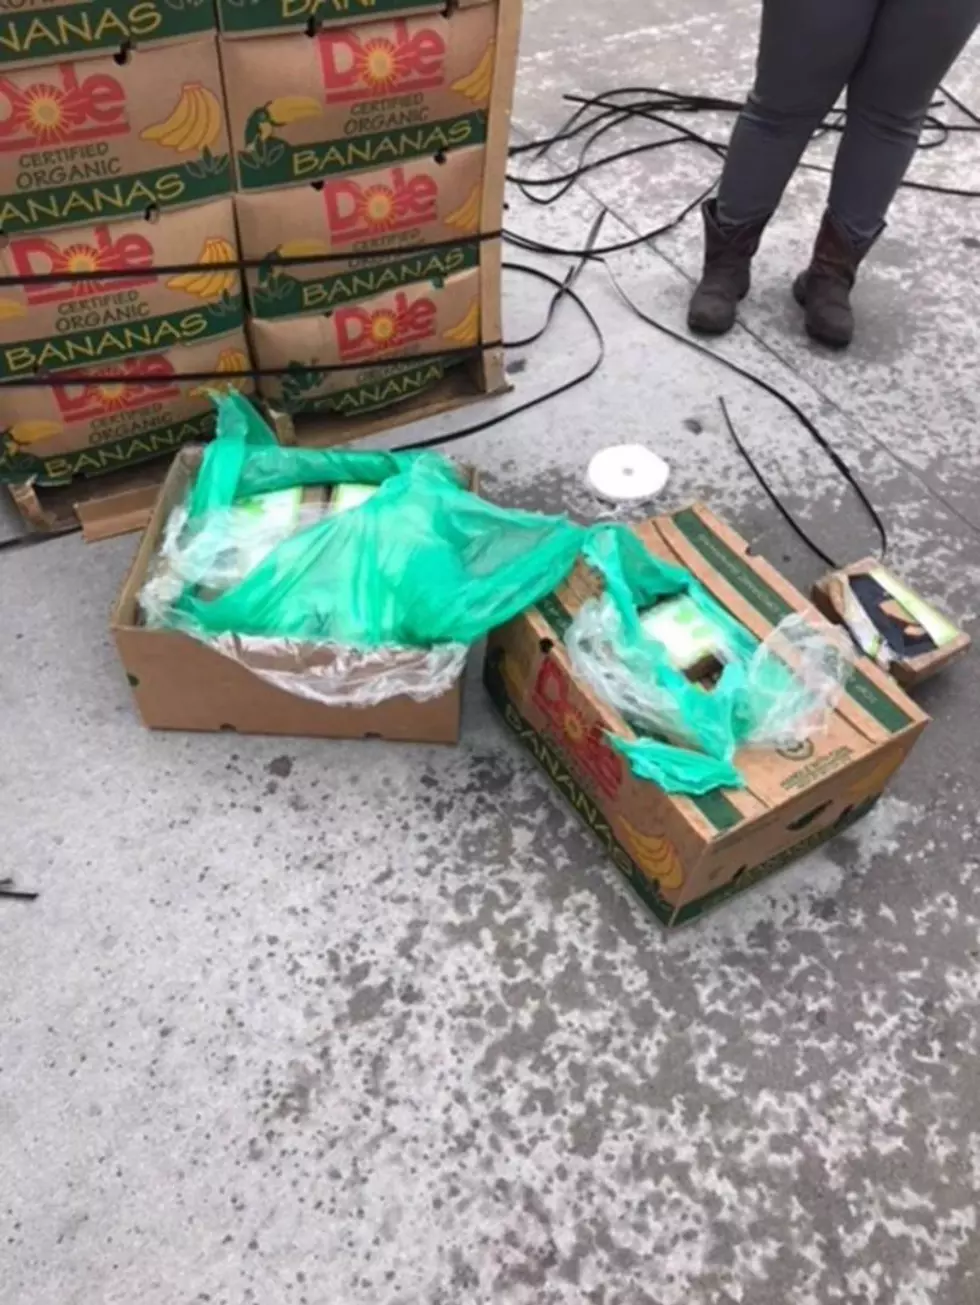 $18 Million Worth of Cocaine Found in Bananas at Texas Prison